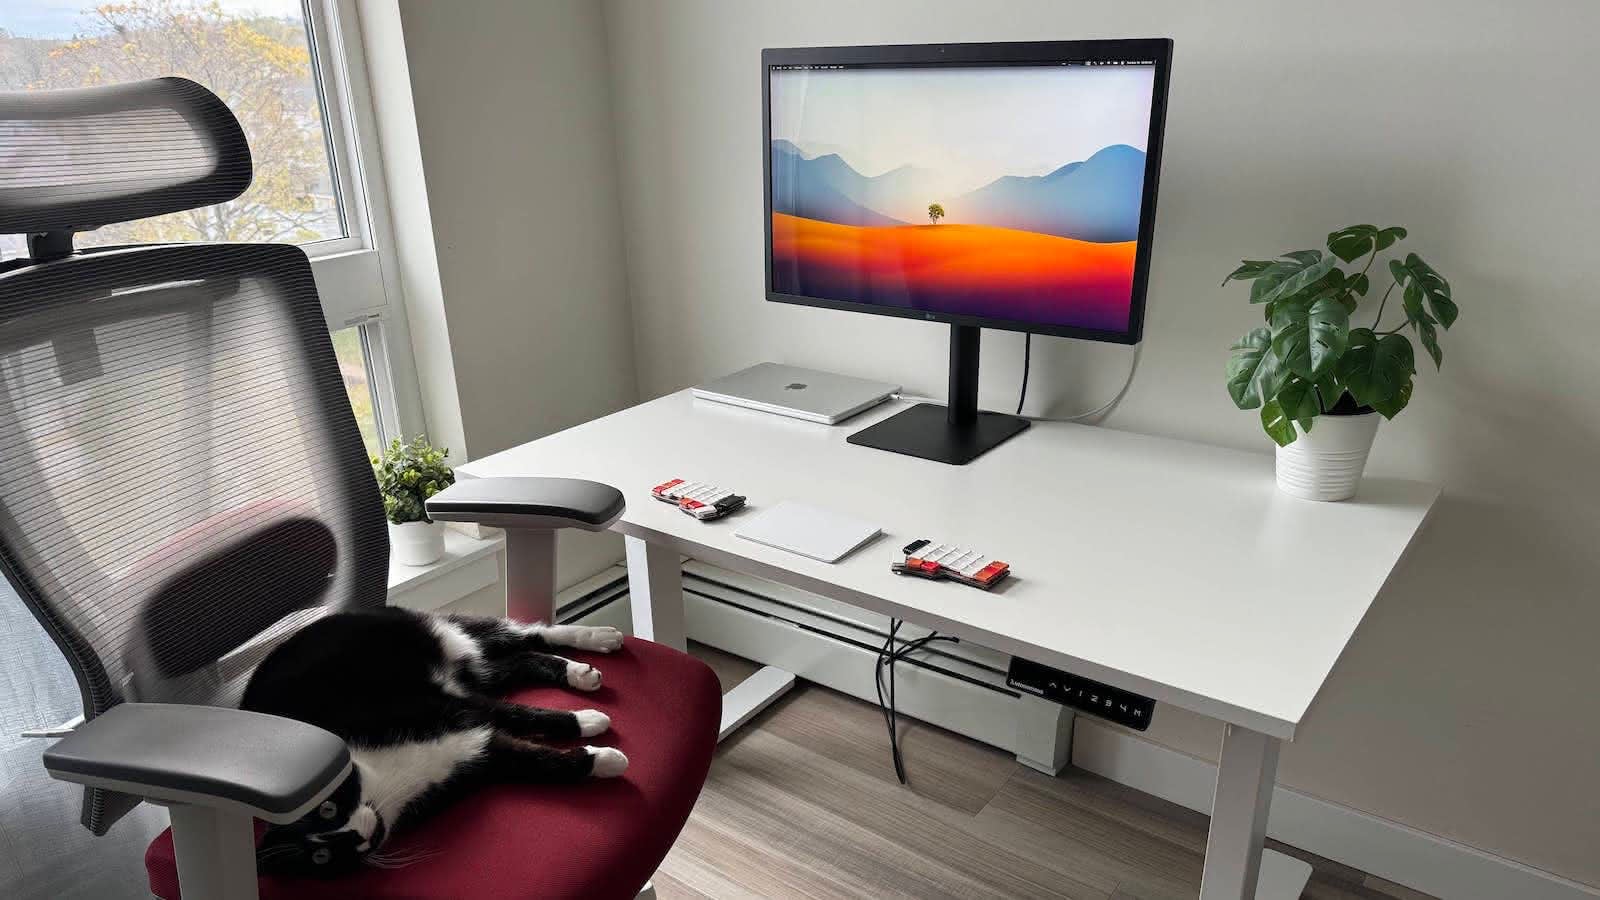 Black cat sitting on red chair facing camera in front of white standing desk